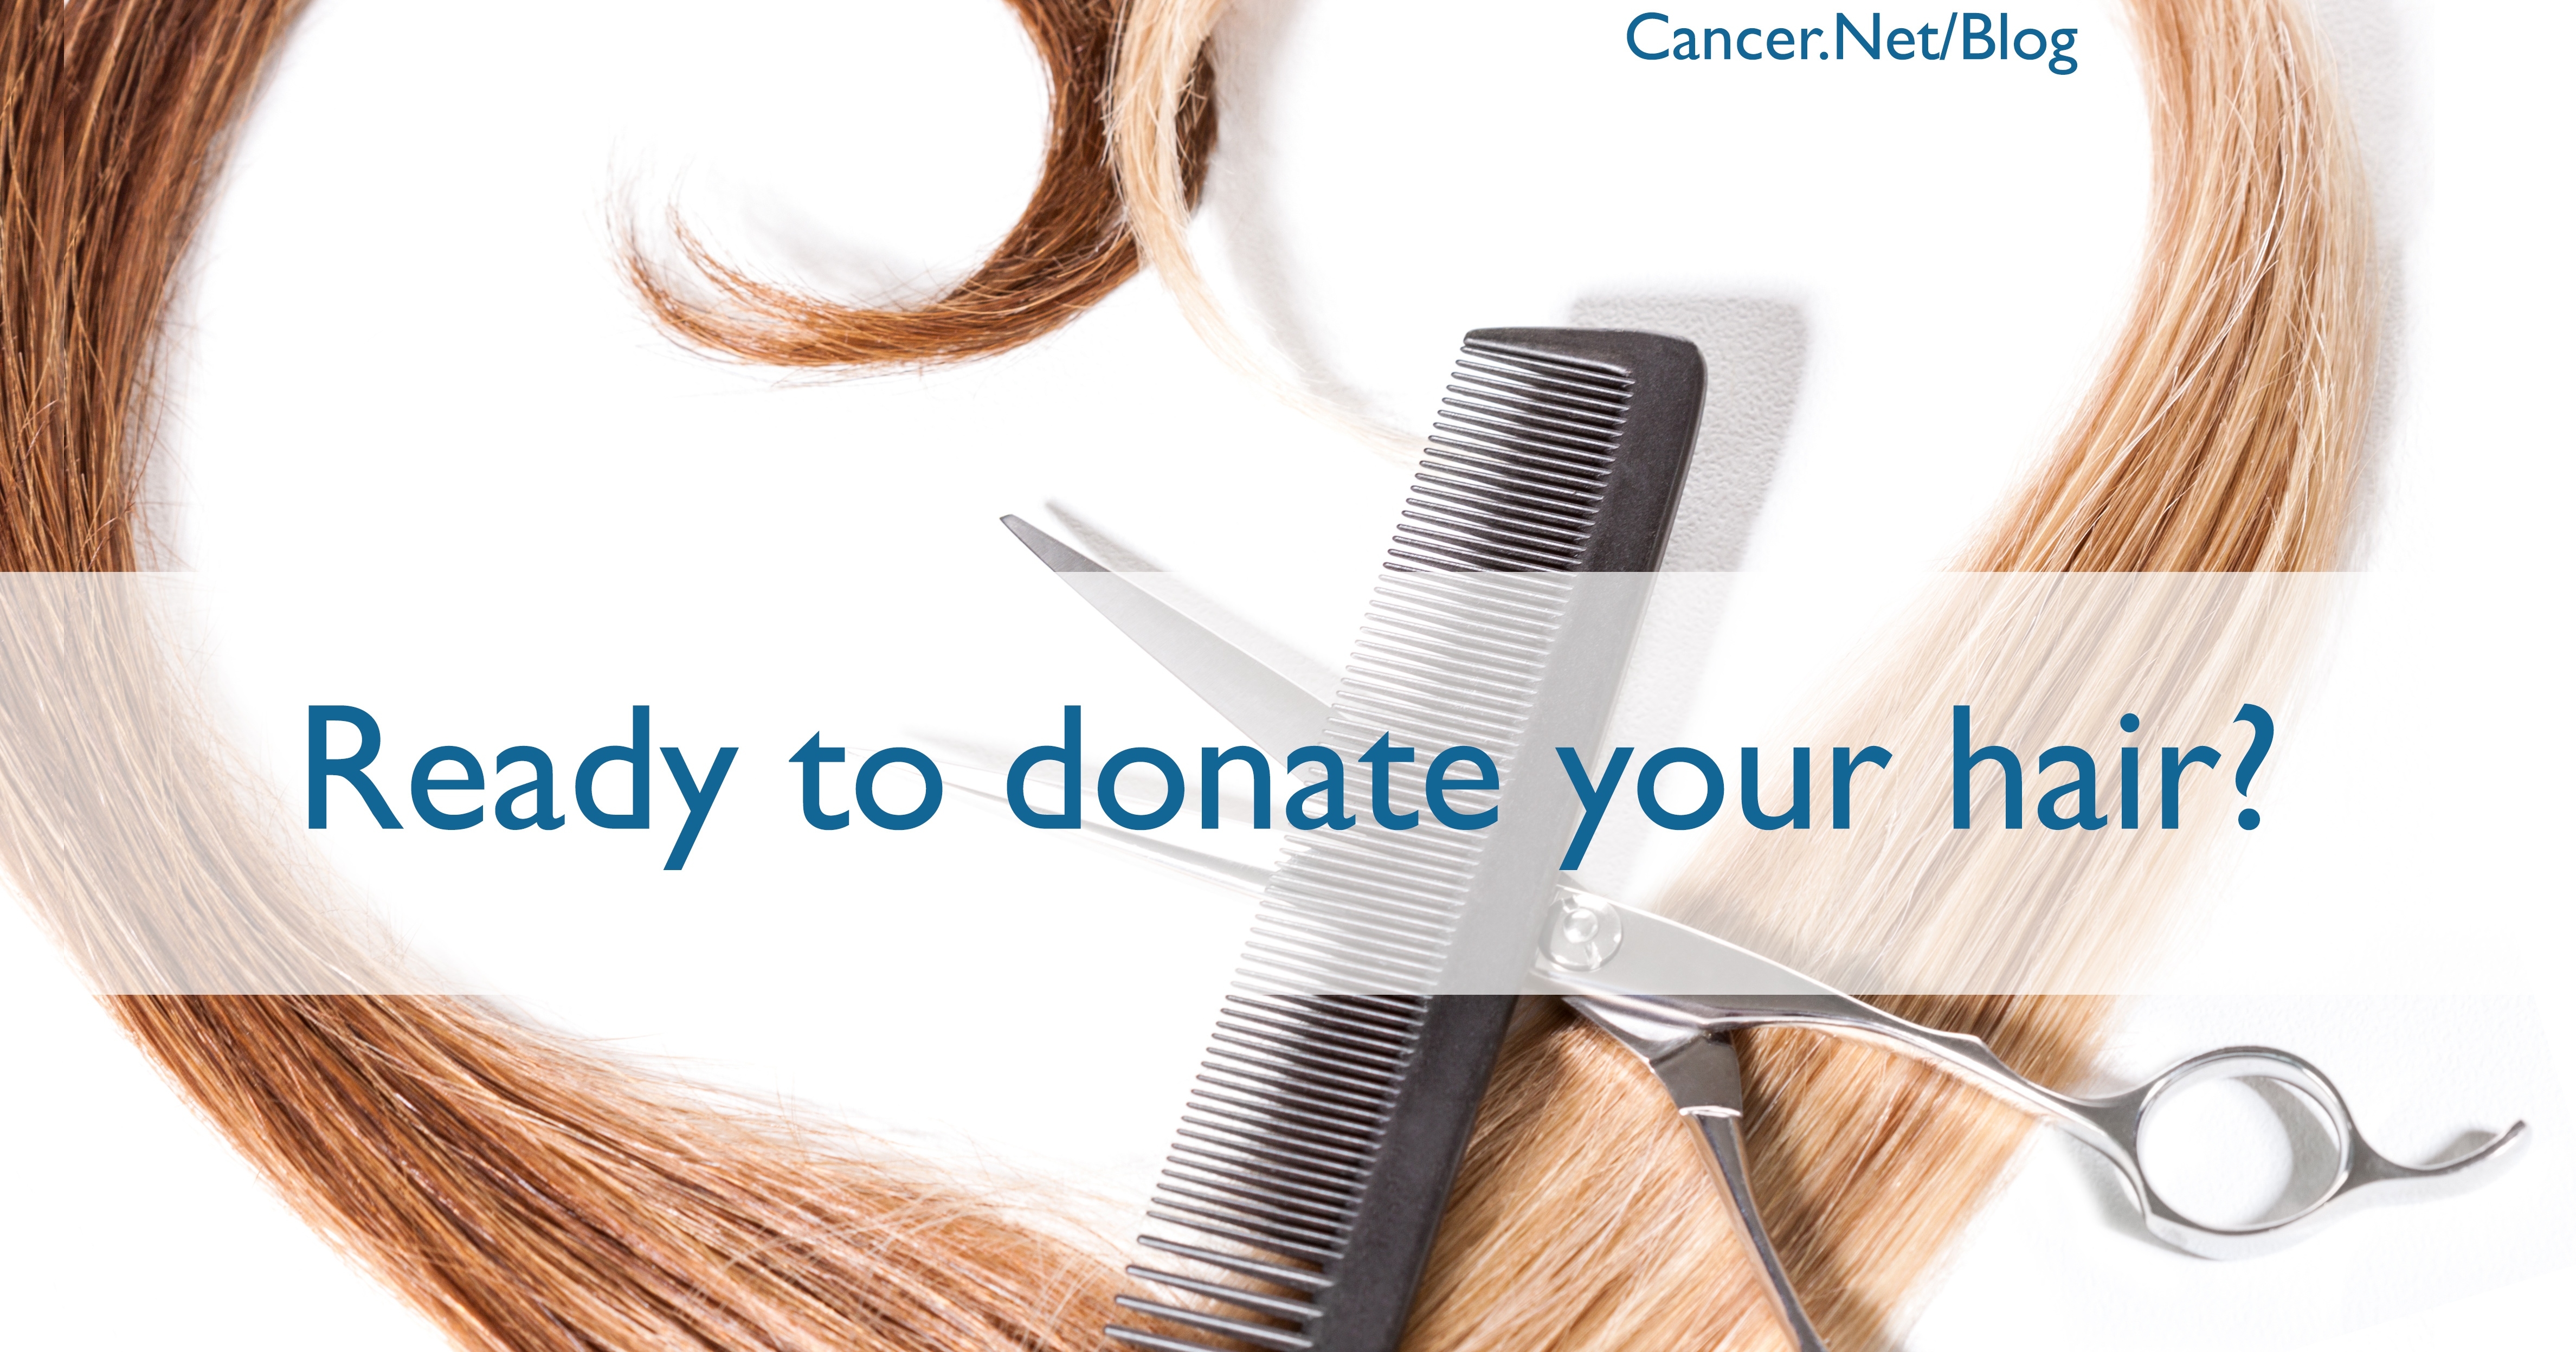 How To Donate Your Hair In 3 Simple Steps | Cancer intended for Cut Your Hair For Cancer